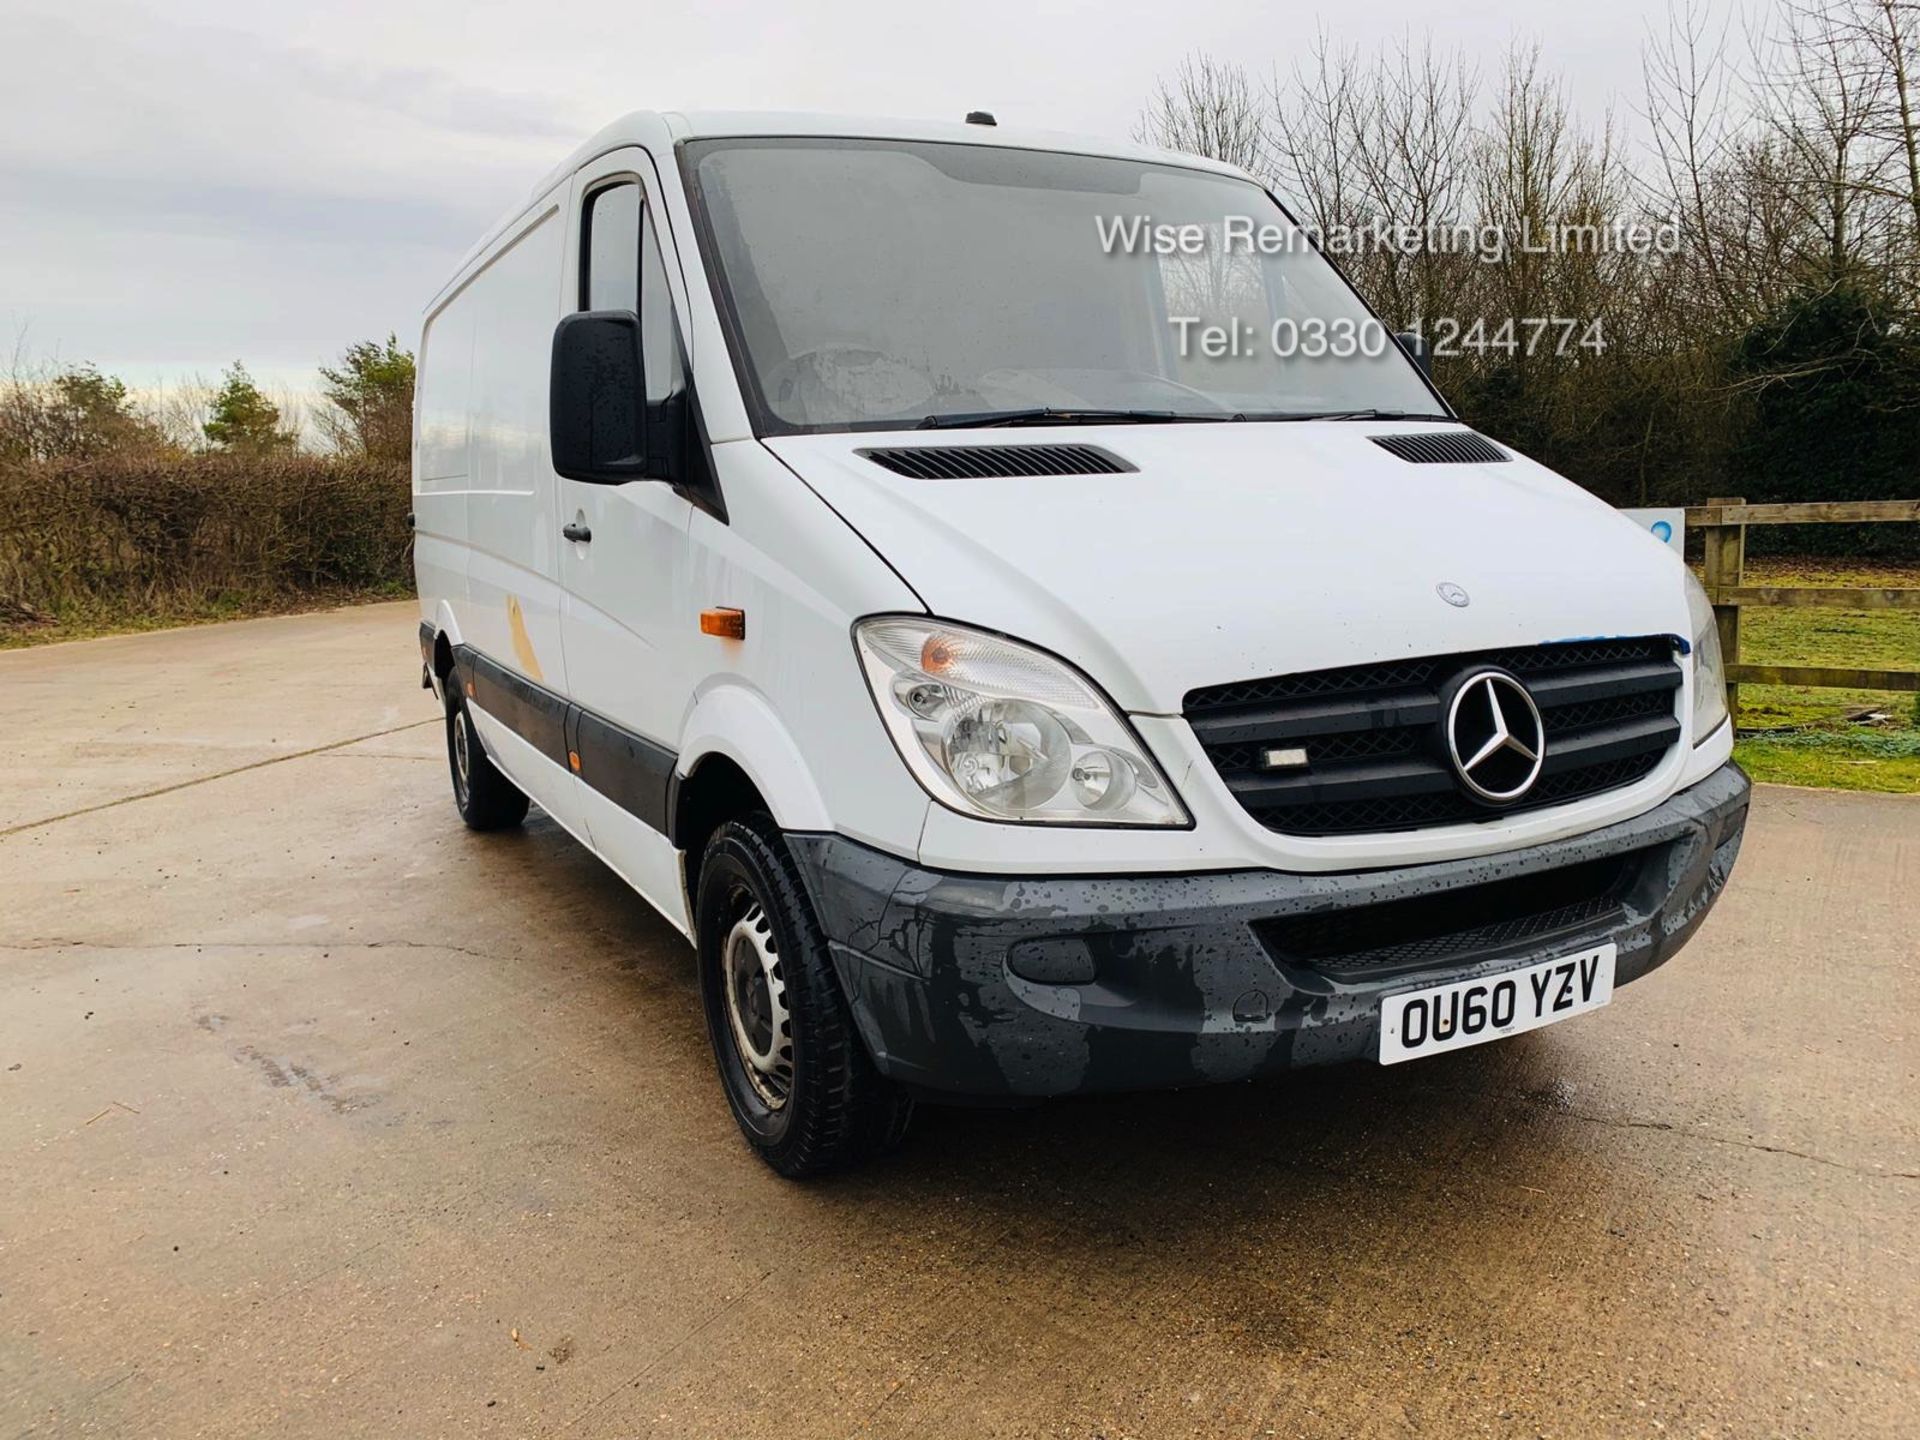 Reserve Met Mercedes Sprinter 313 CDI 2.1 TD *Automatic Triptronic Gearbox* - 2011 Model - Ply Lined - Image 5 of 15